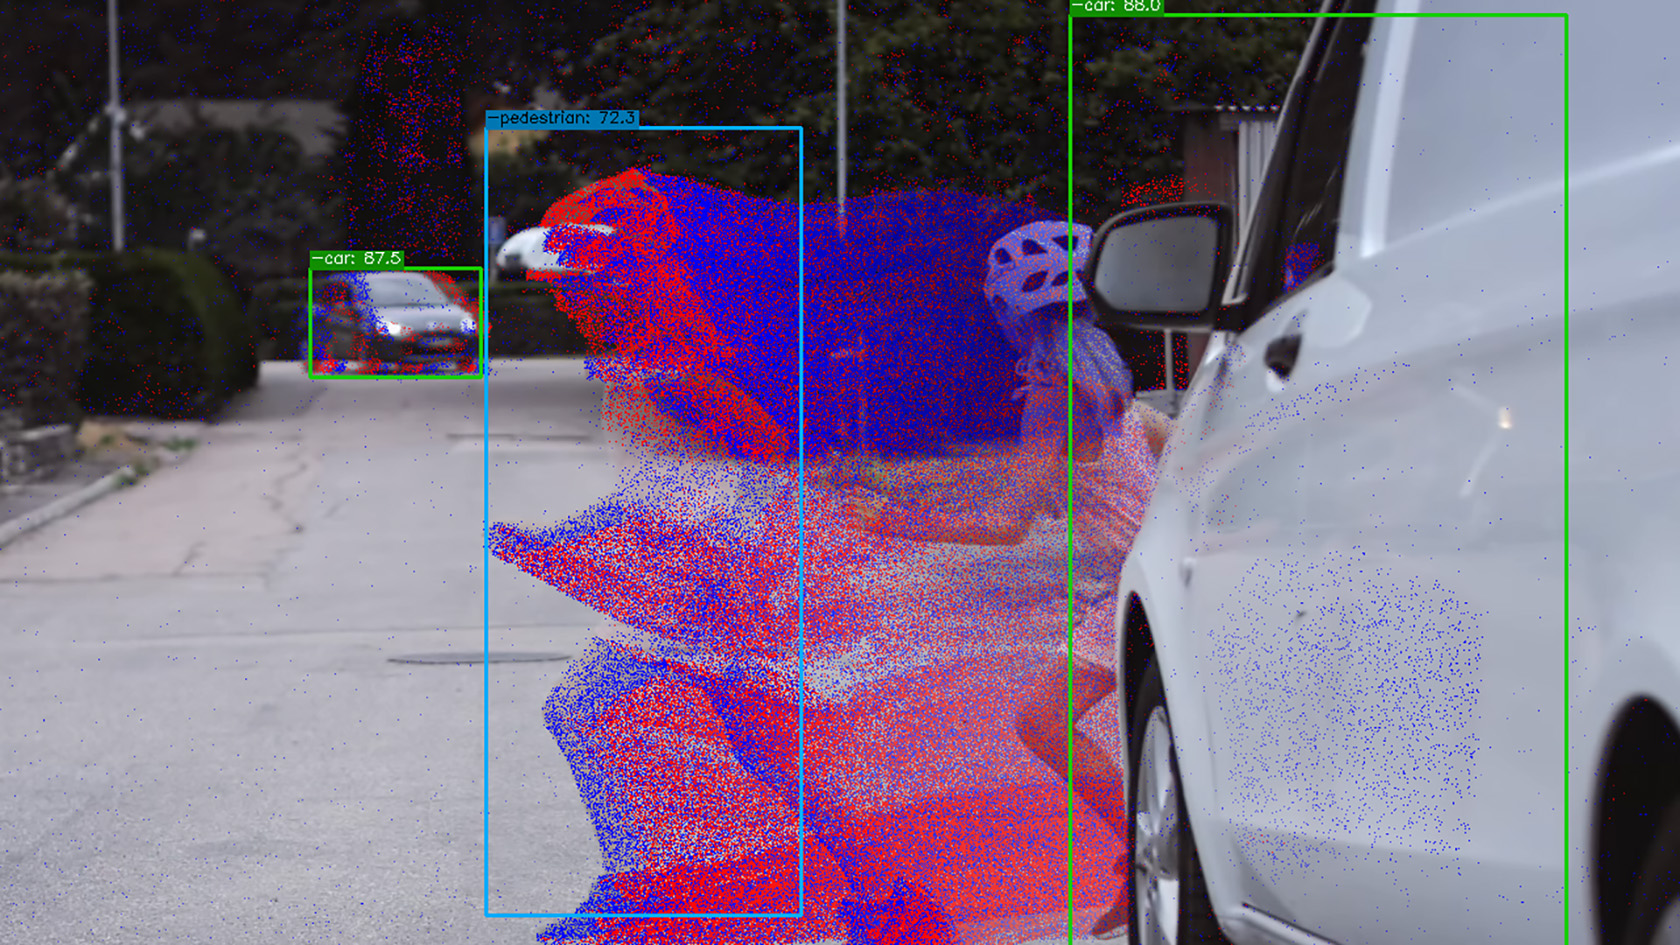 Bio-Inspired Cameras and AI Help Drivers Detect Pedestrians and Obstacles Faster